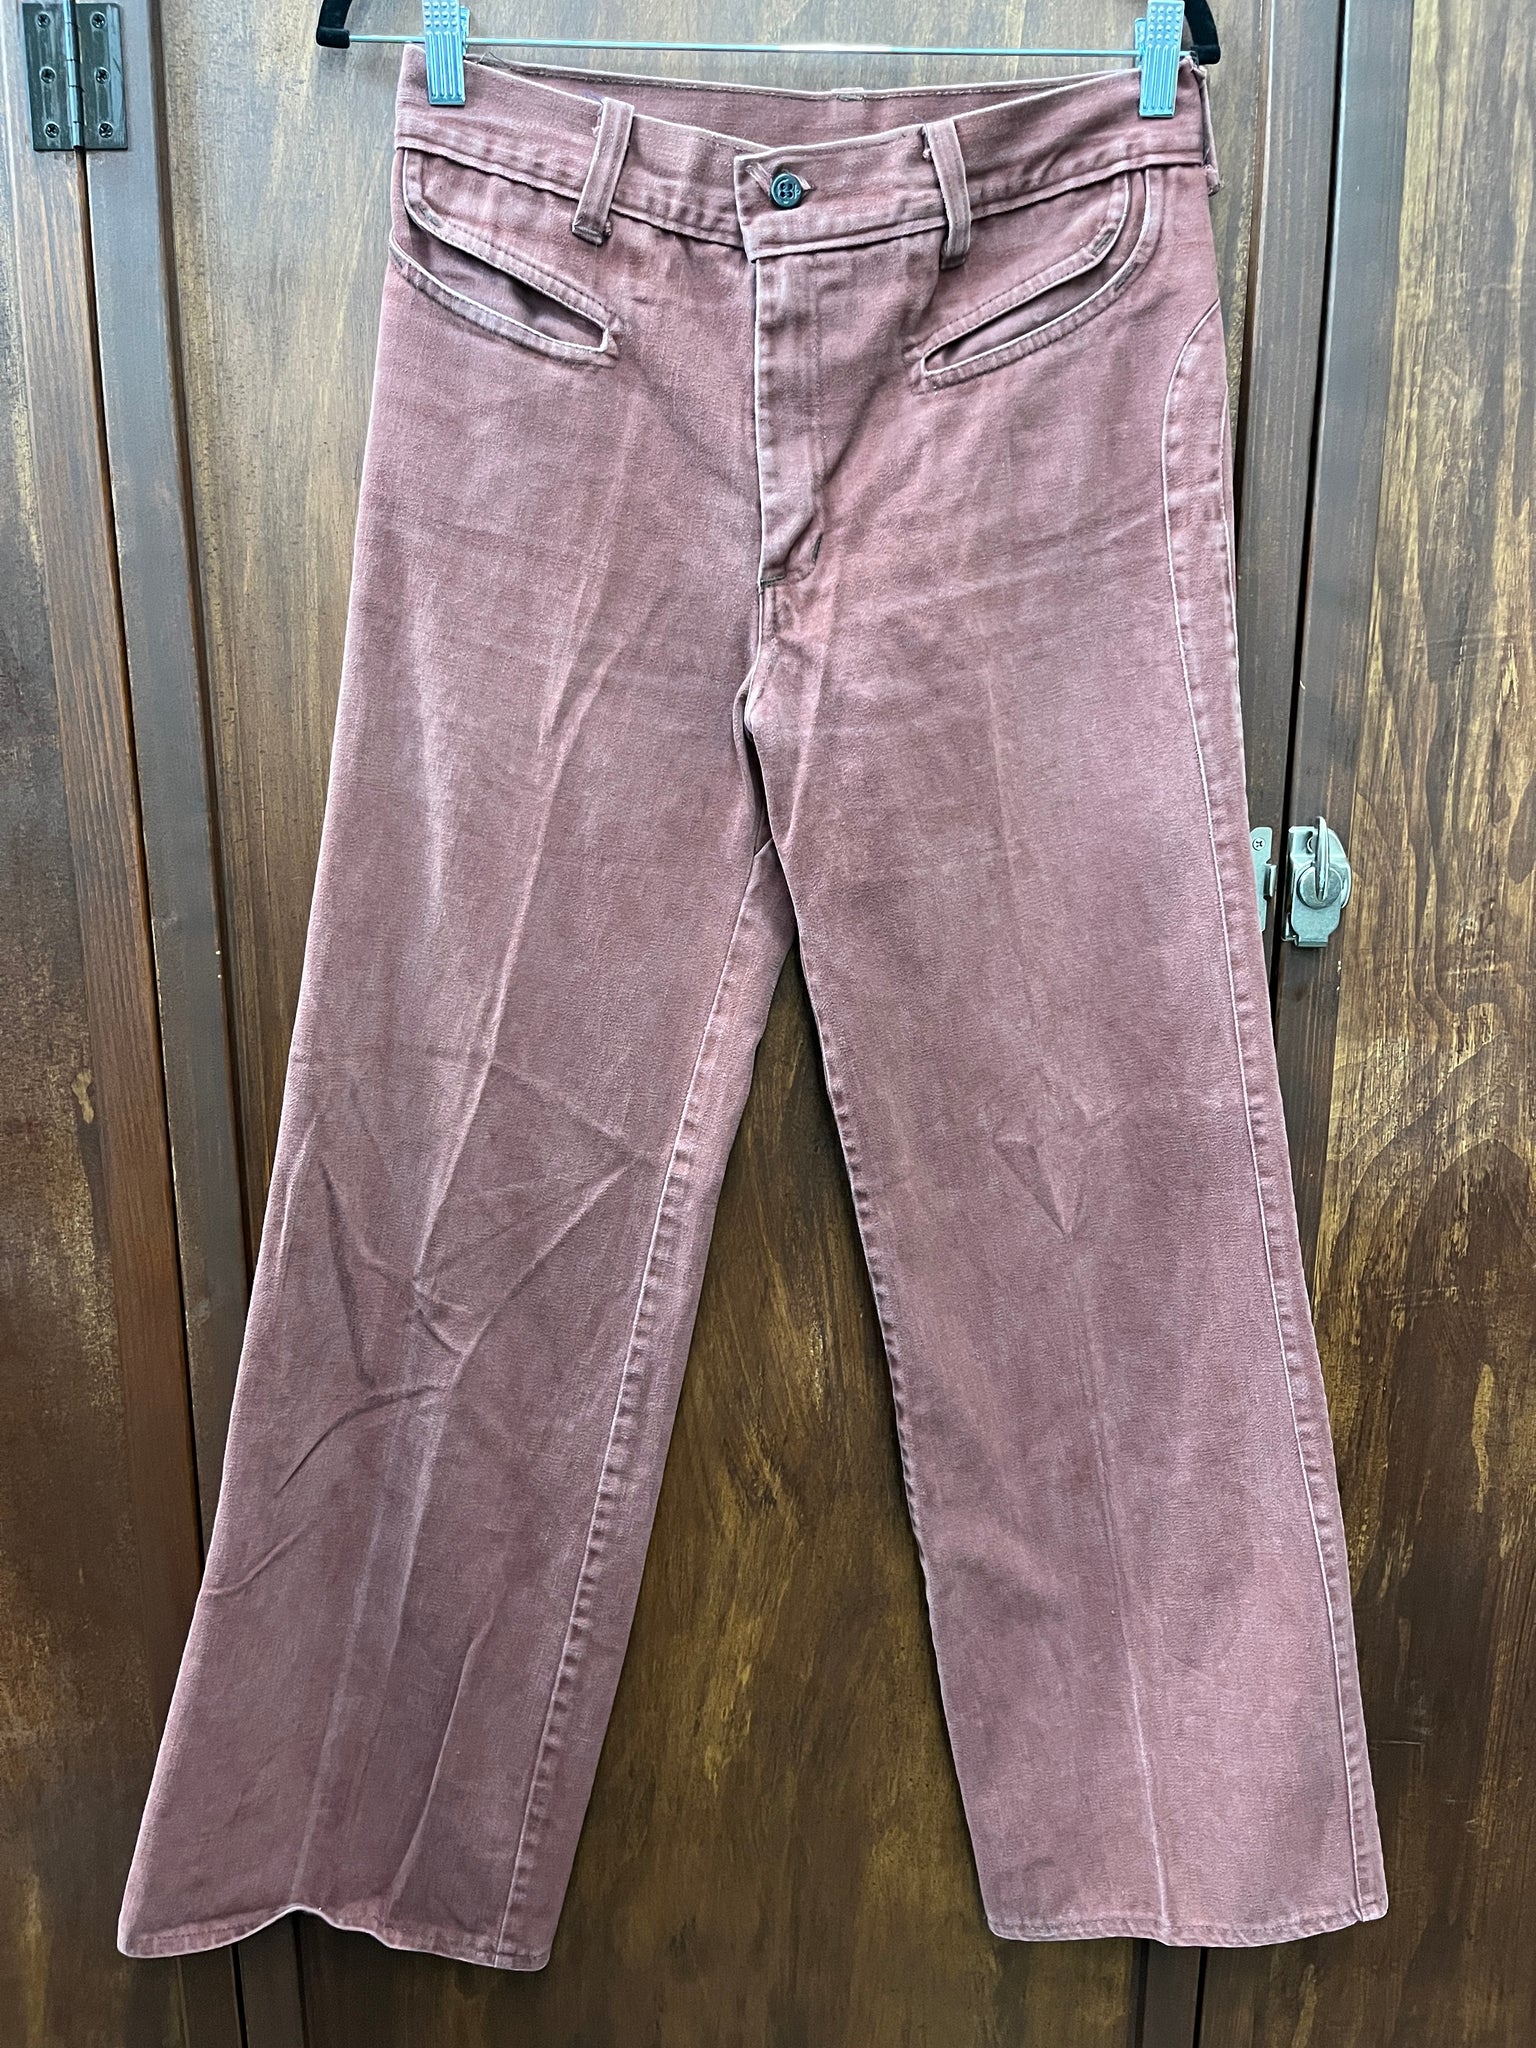 1970s JEANS- Specifics- Rust with pocket details